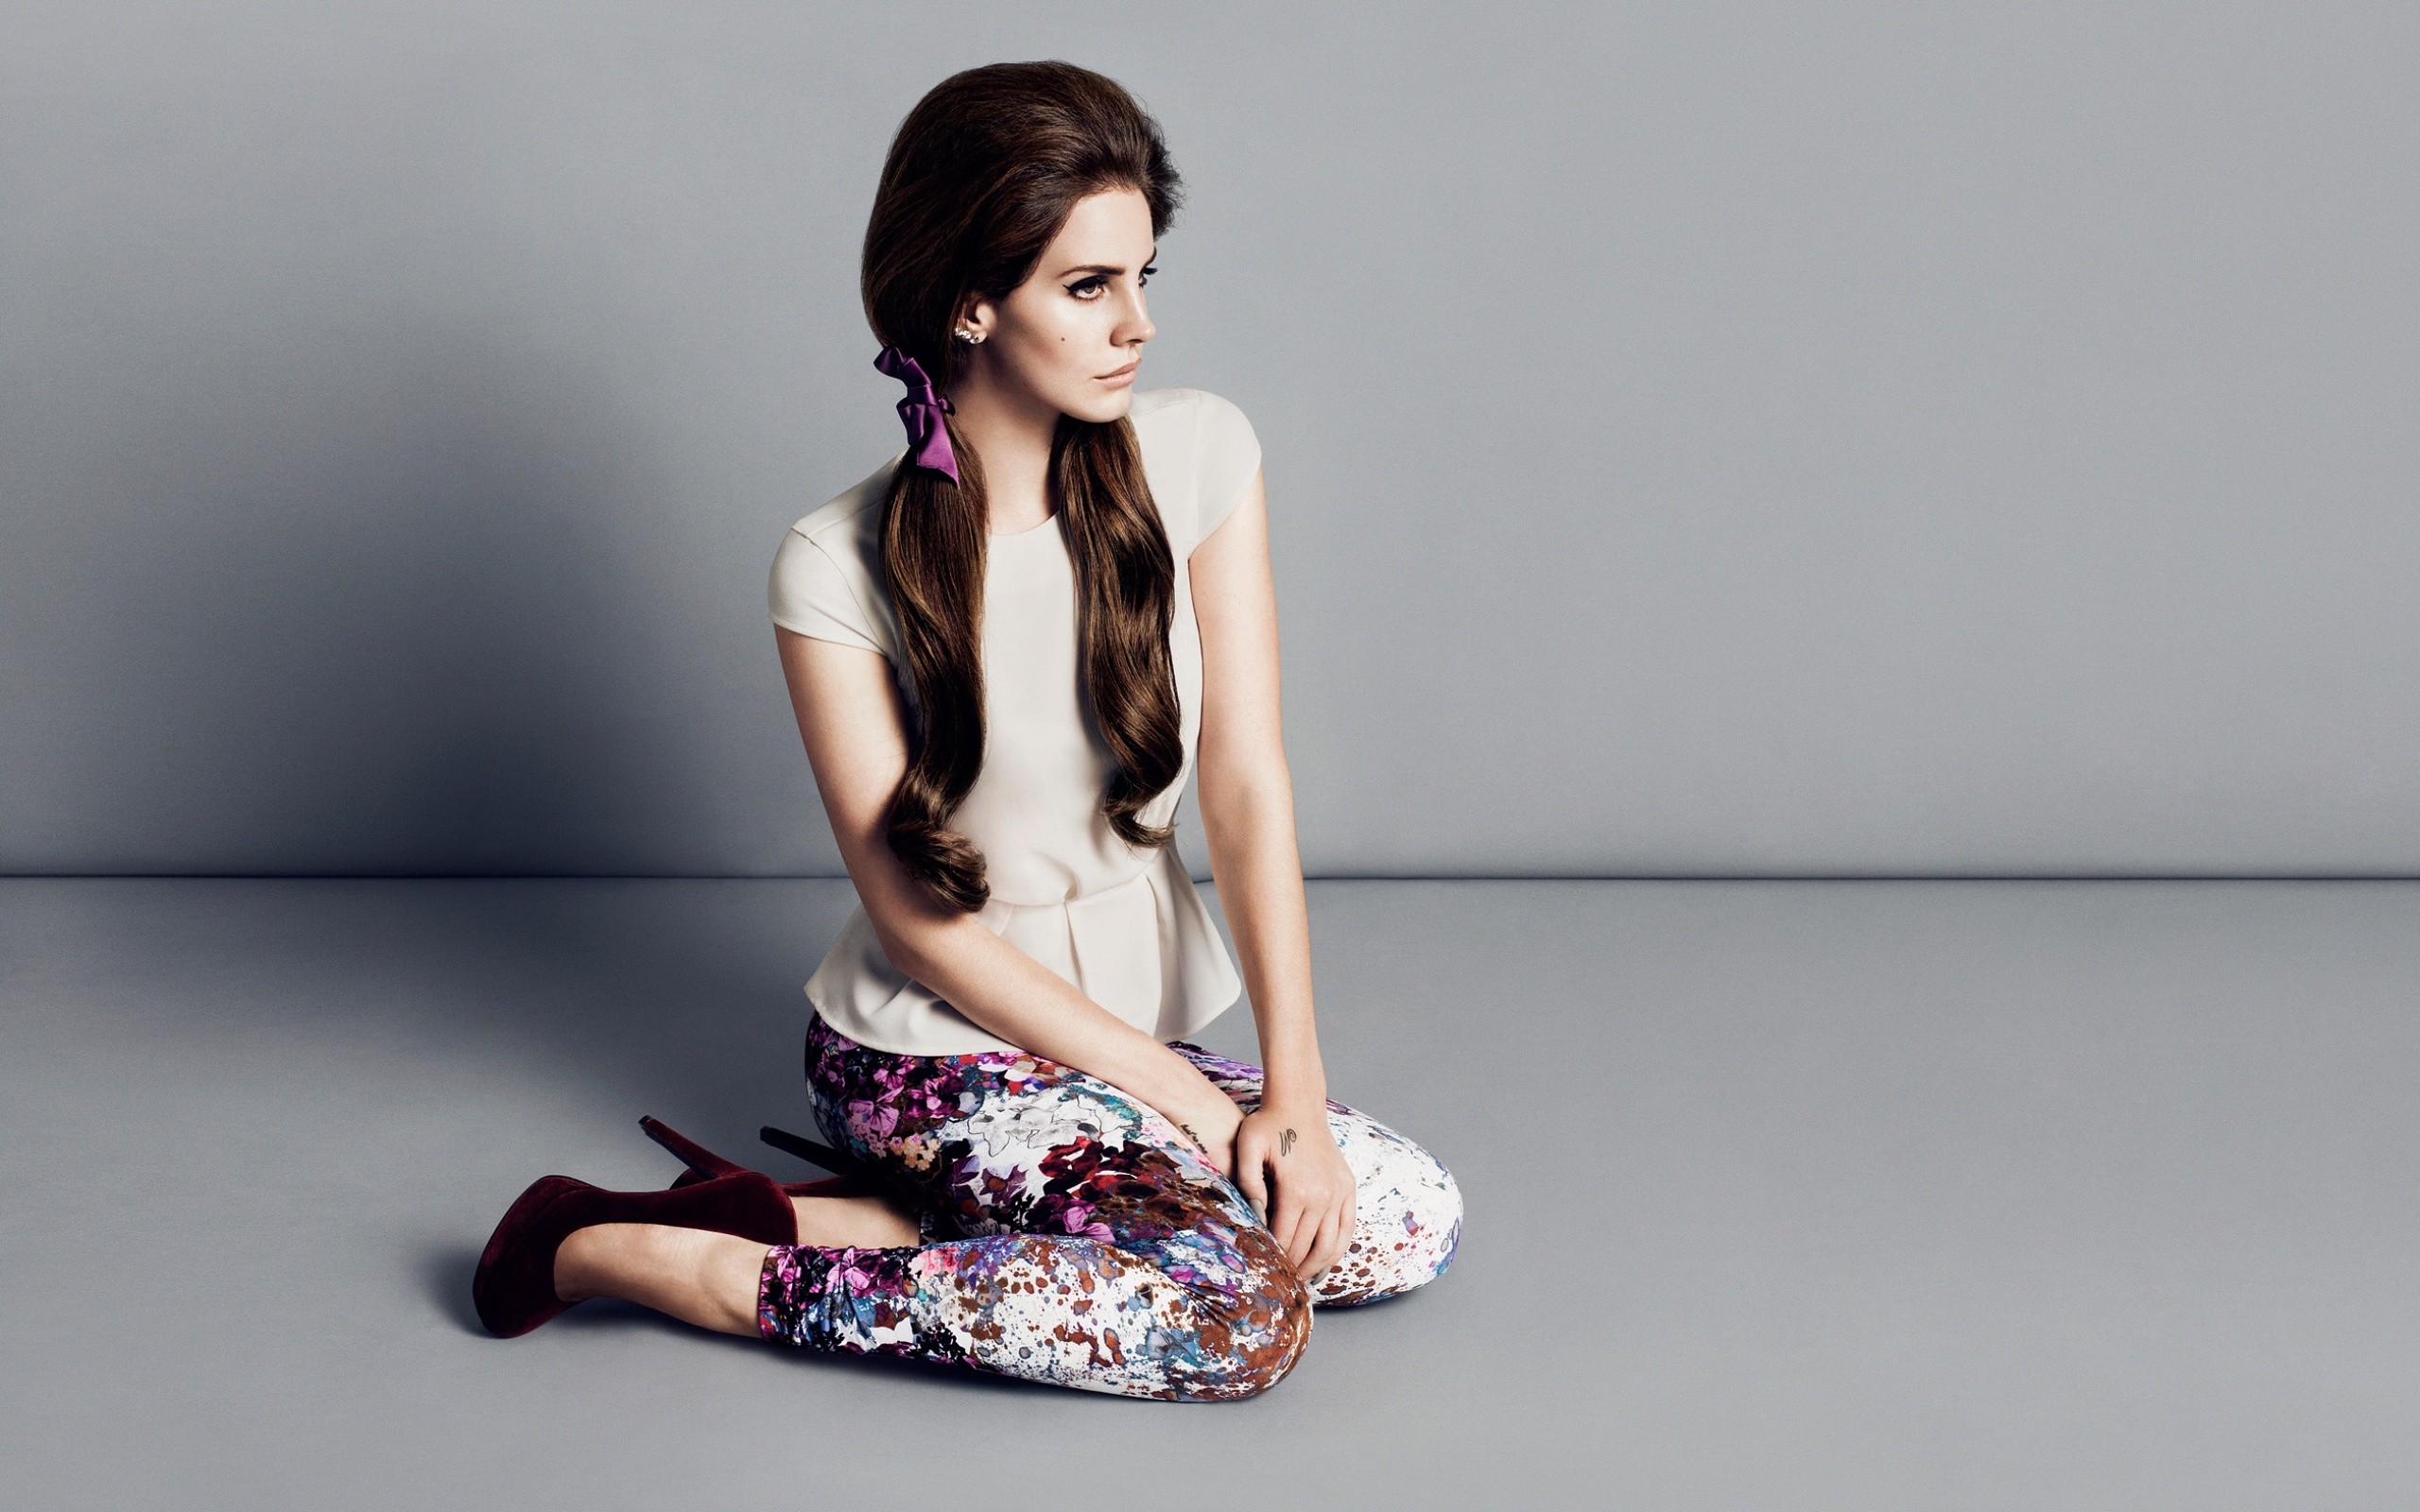 Emma Watson sitting on the floor in a white top and floral pants - Lana Del Rey